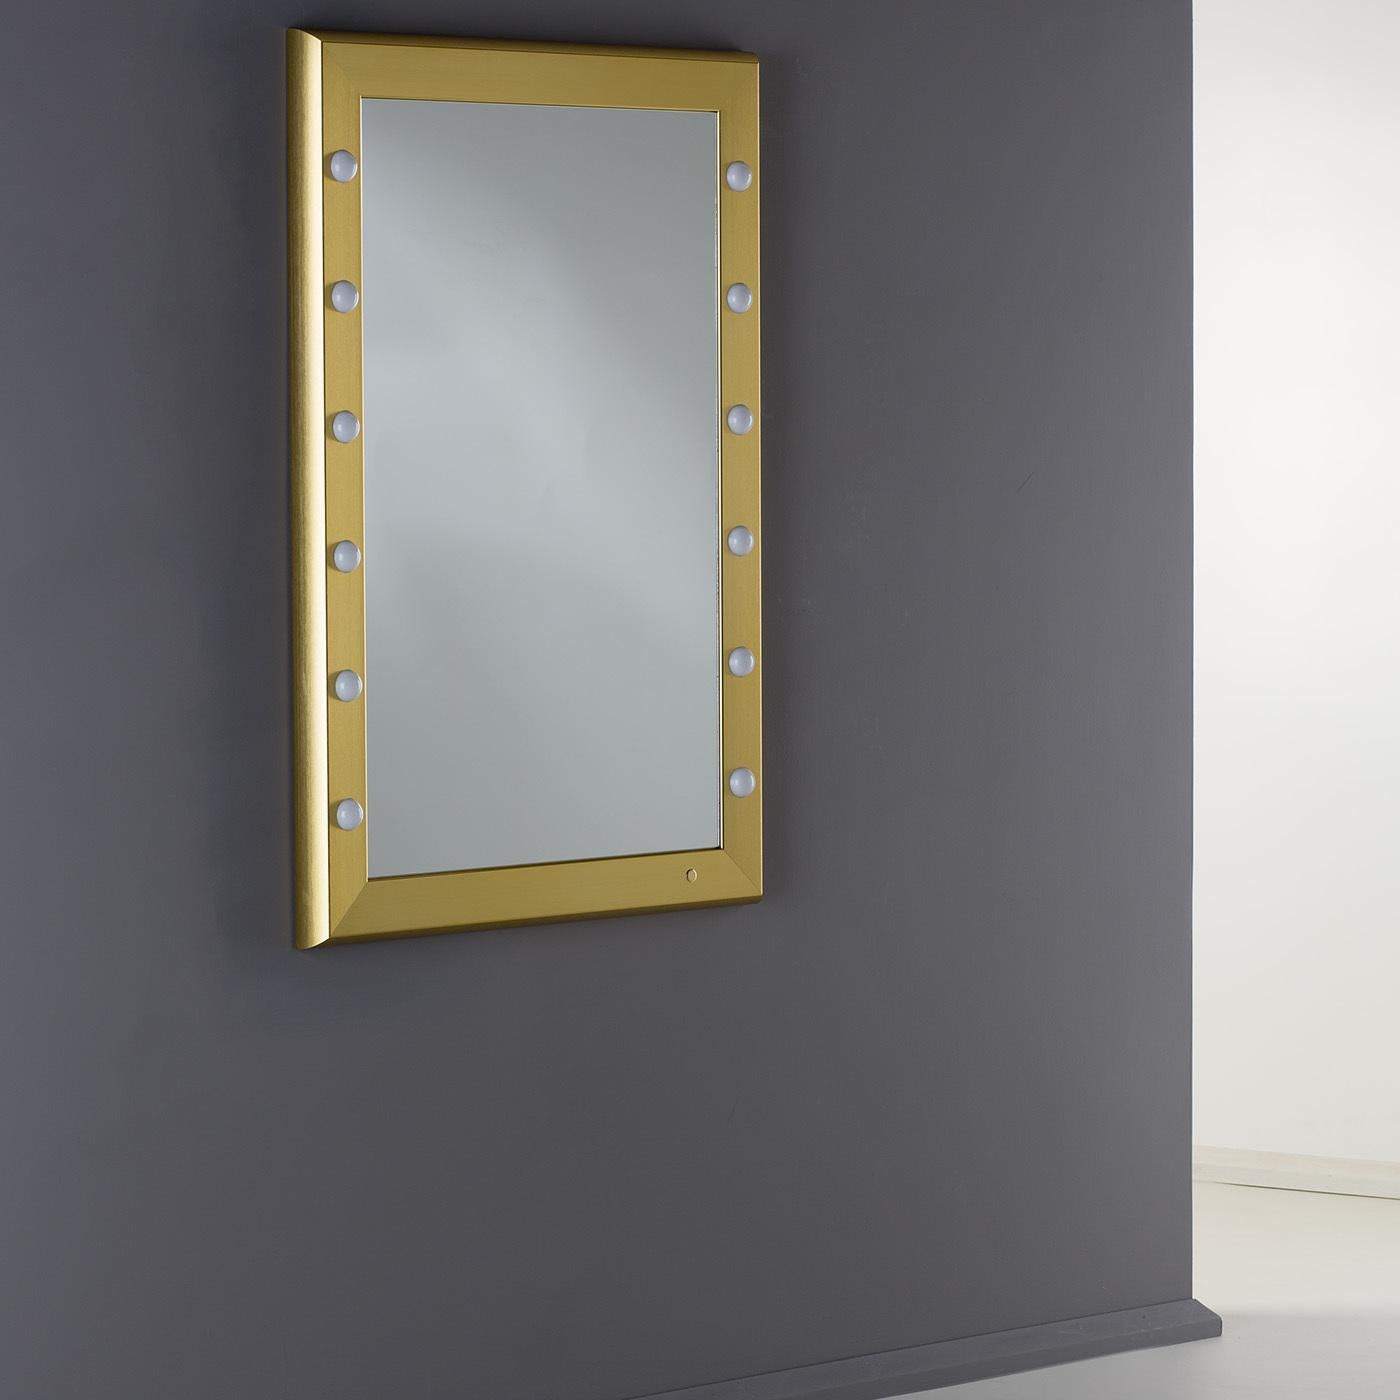 This stunning lighted mirror exemplifies modern luxury with its impeccable craftsmanship and attention to detail designed to bring functional style to luxury interiors. Part of the SP series, this wall mirror features a polished gold anodized